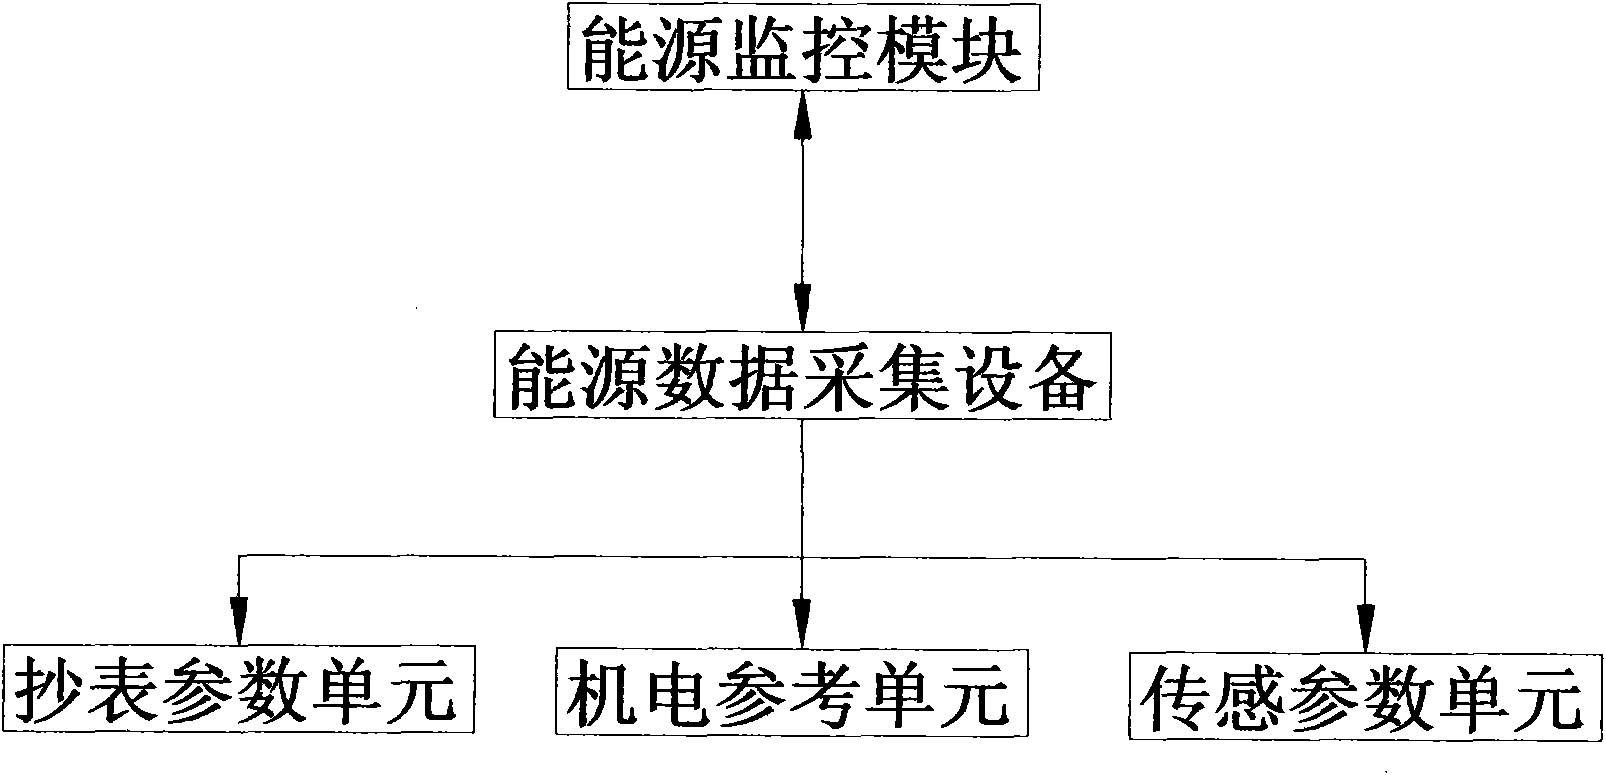 Efficiency service system of electrical power unit